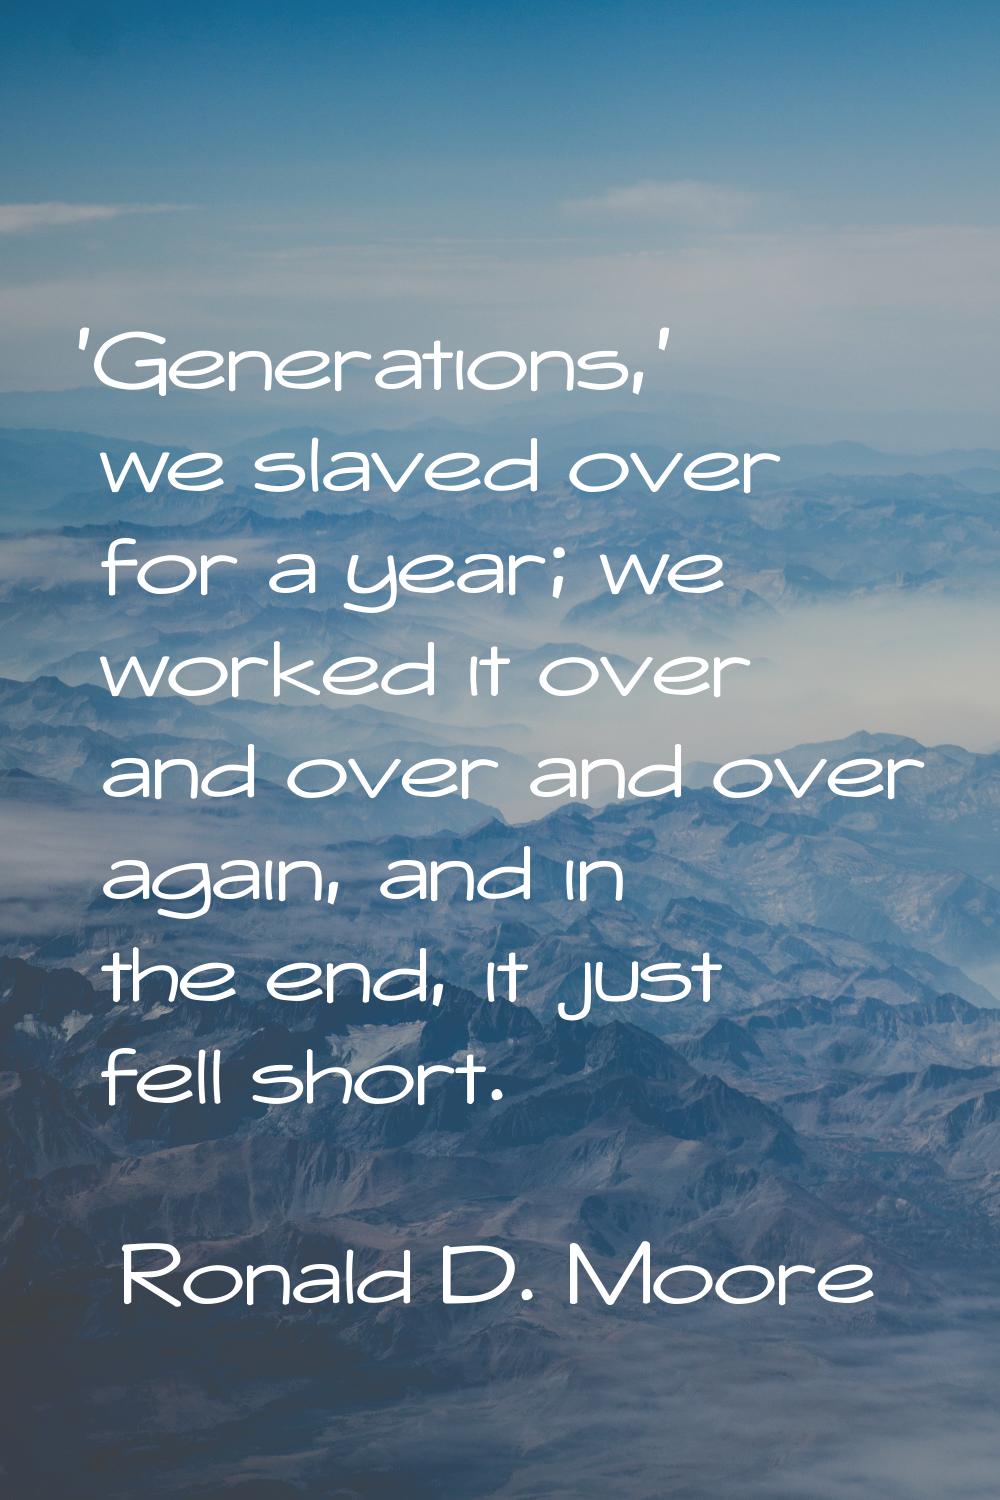 'Generations,' we slaved over for a year; we worked it over and over and over again, and in the end